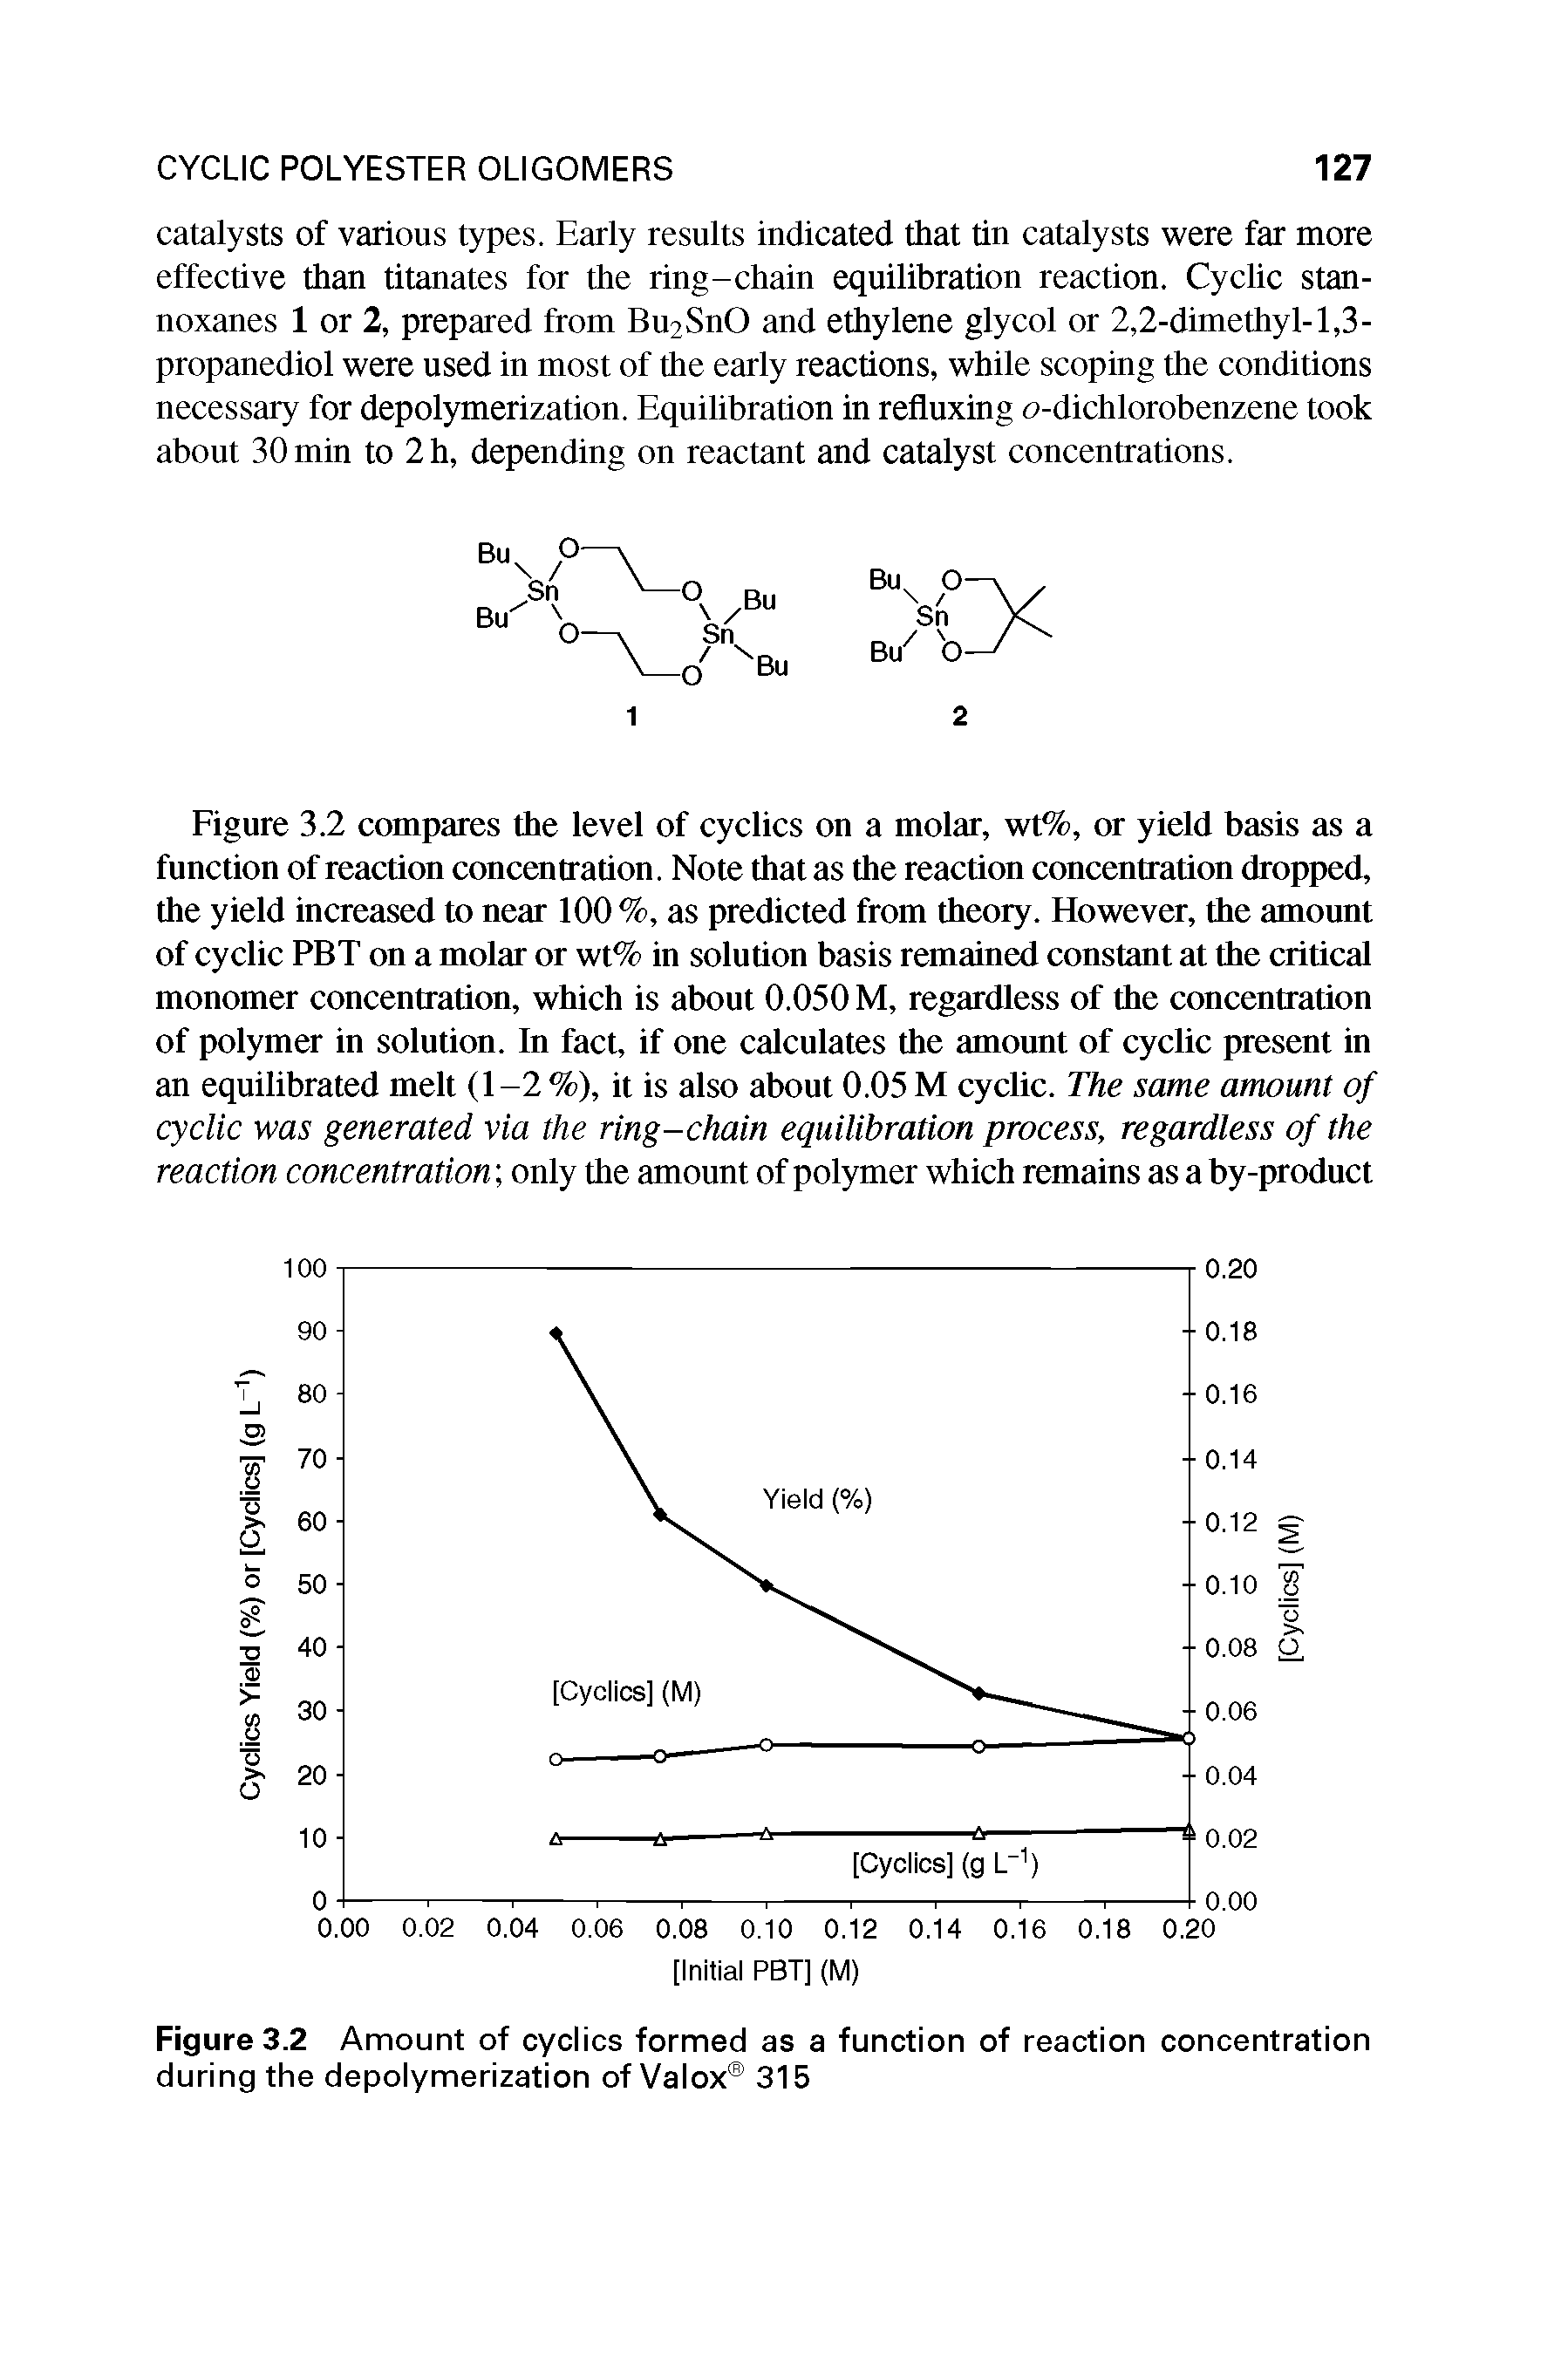 Figure 3.2 Amount of cyclics formed as a function of reaction concentration during the depolymerization of Valox 315...